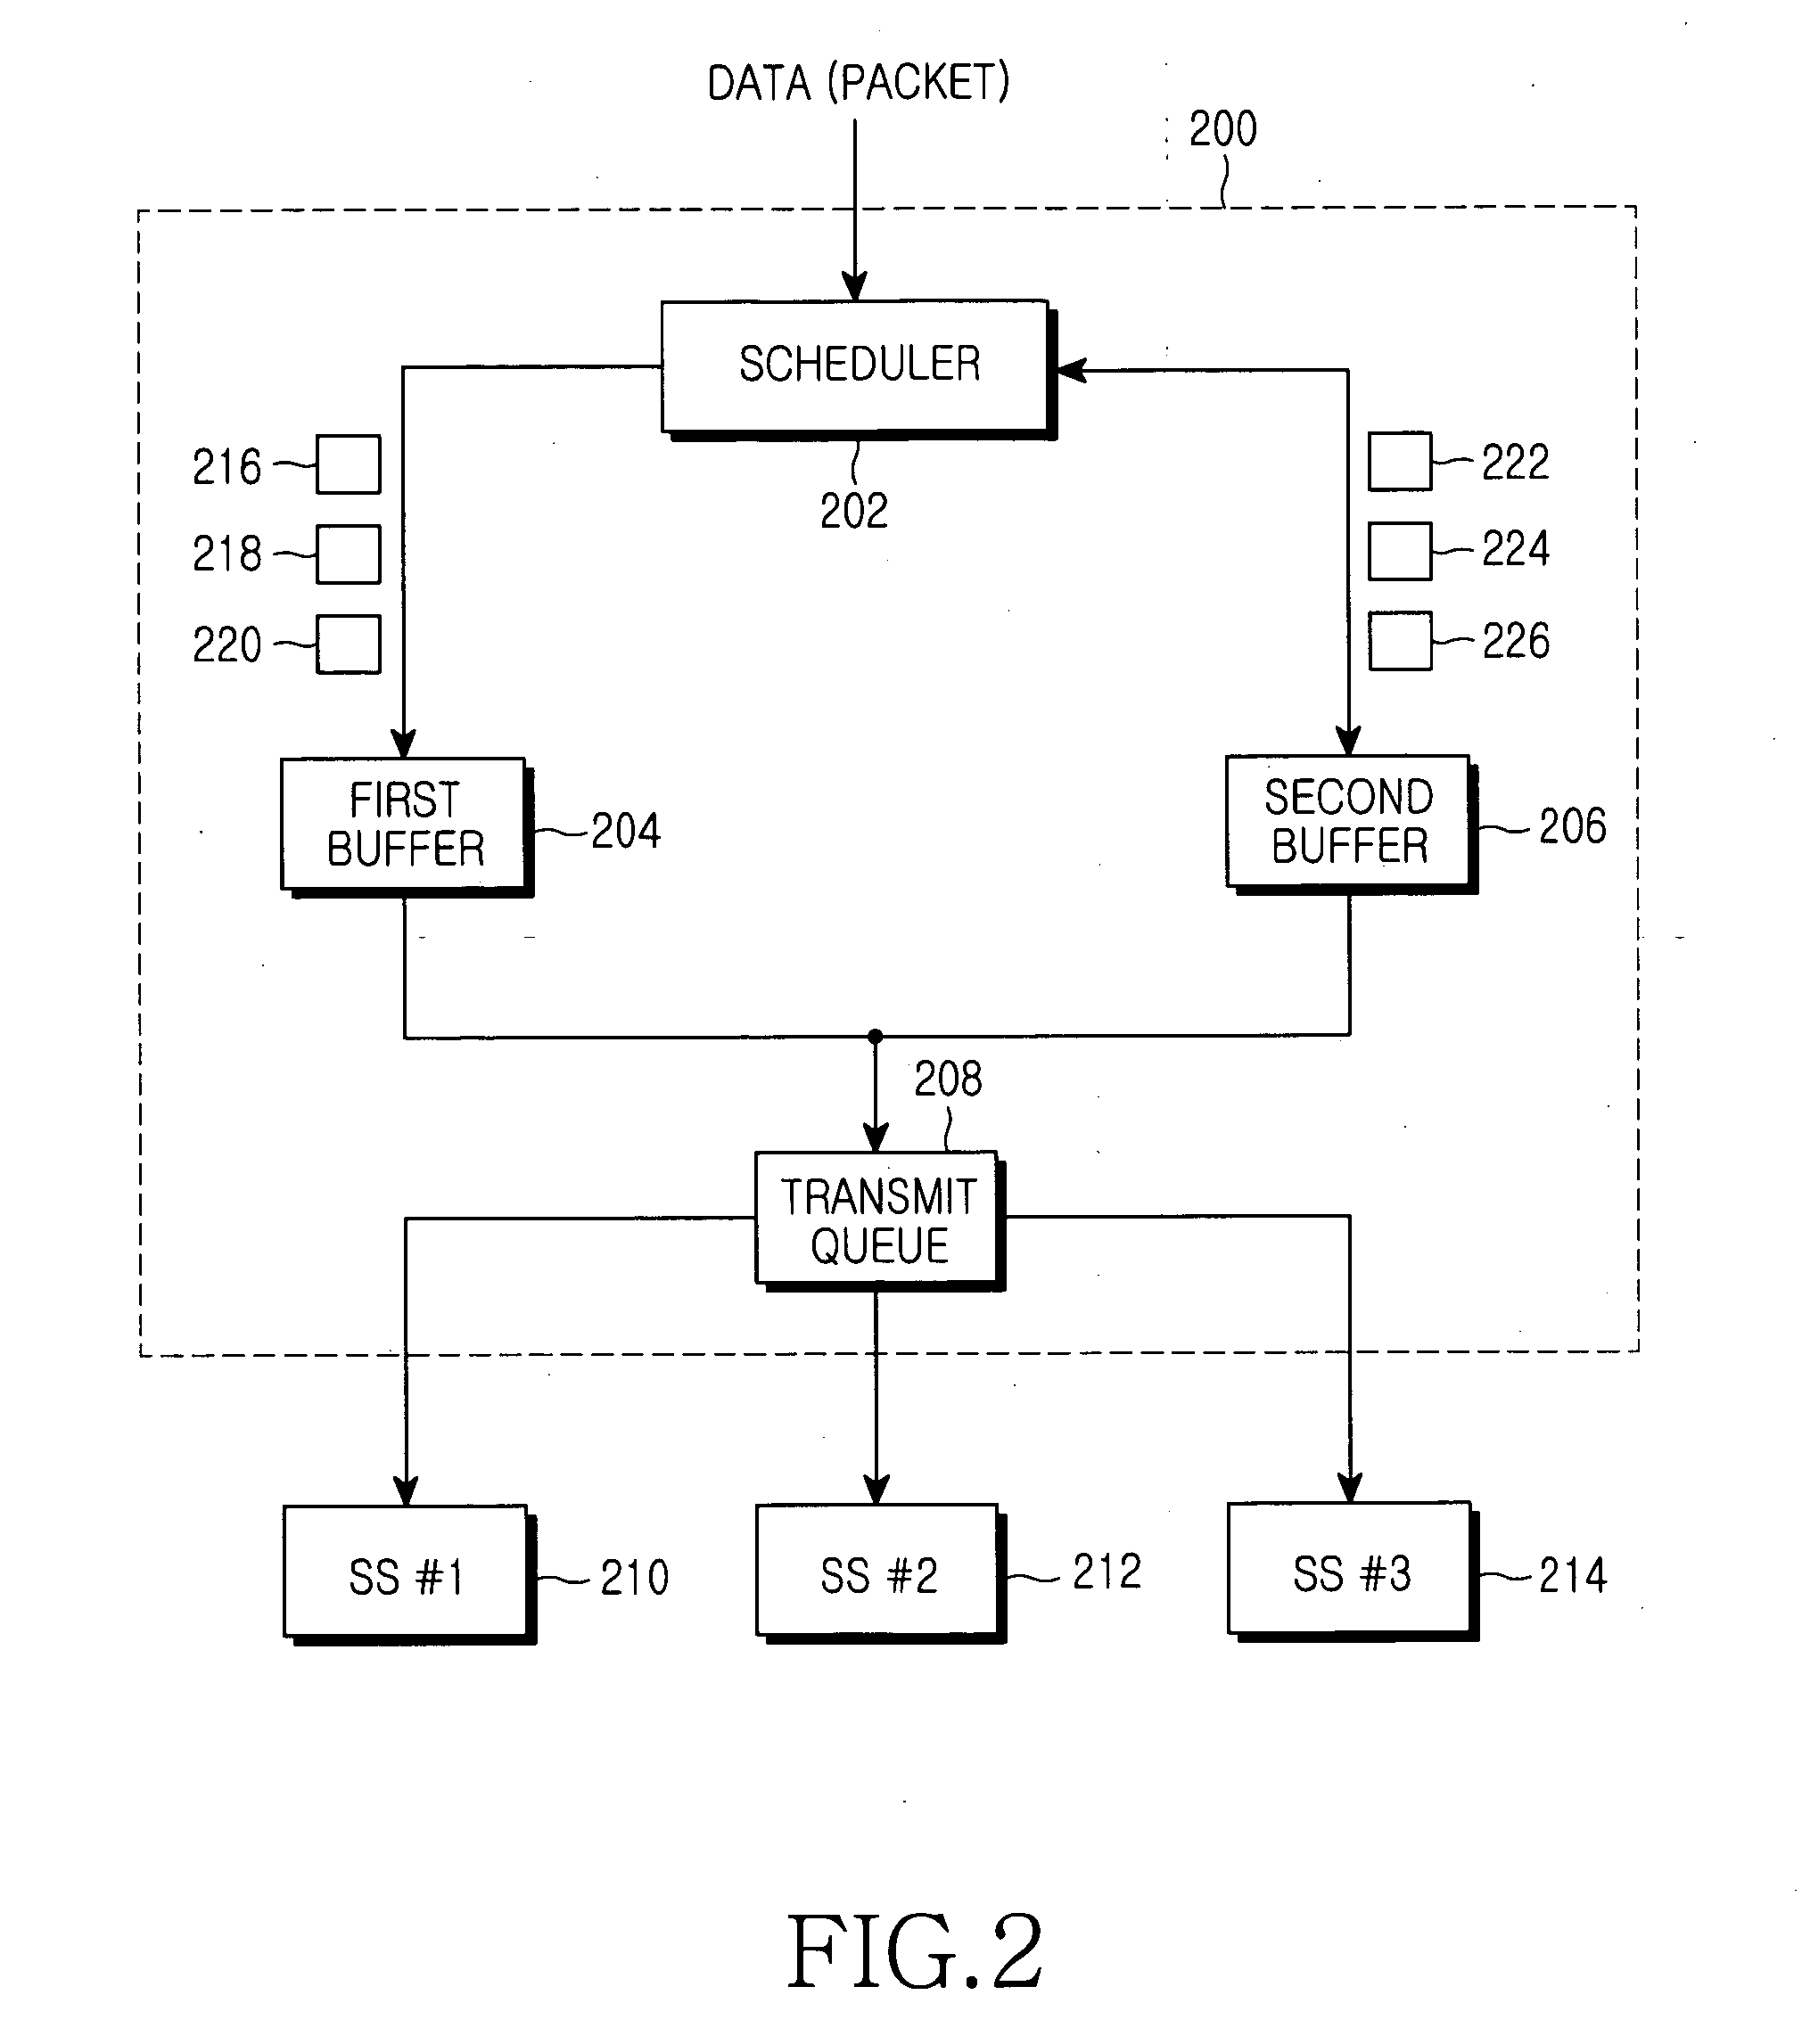 Apparatus and method for scheduling packets in a wireless communication system